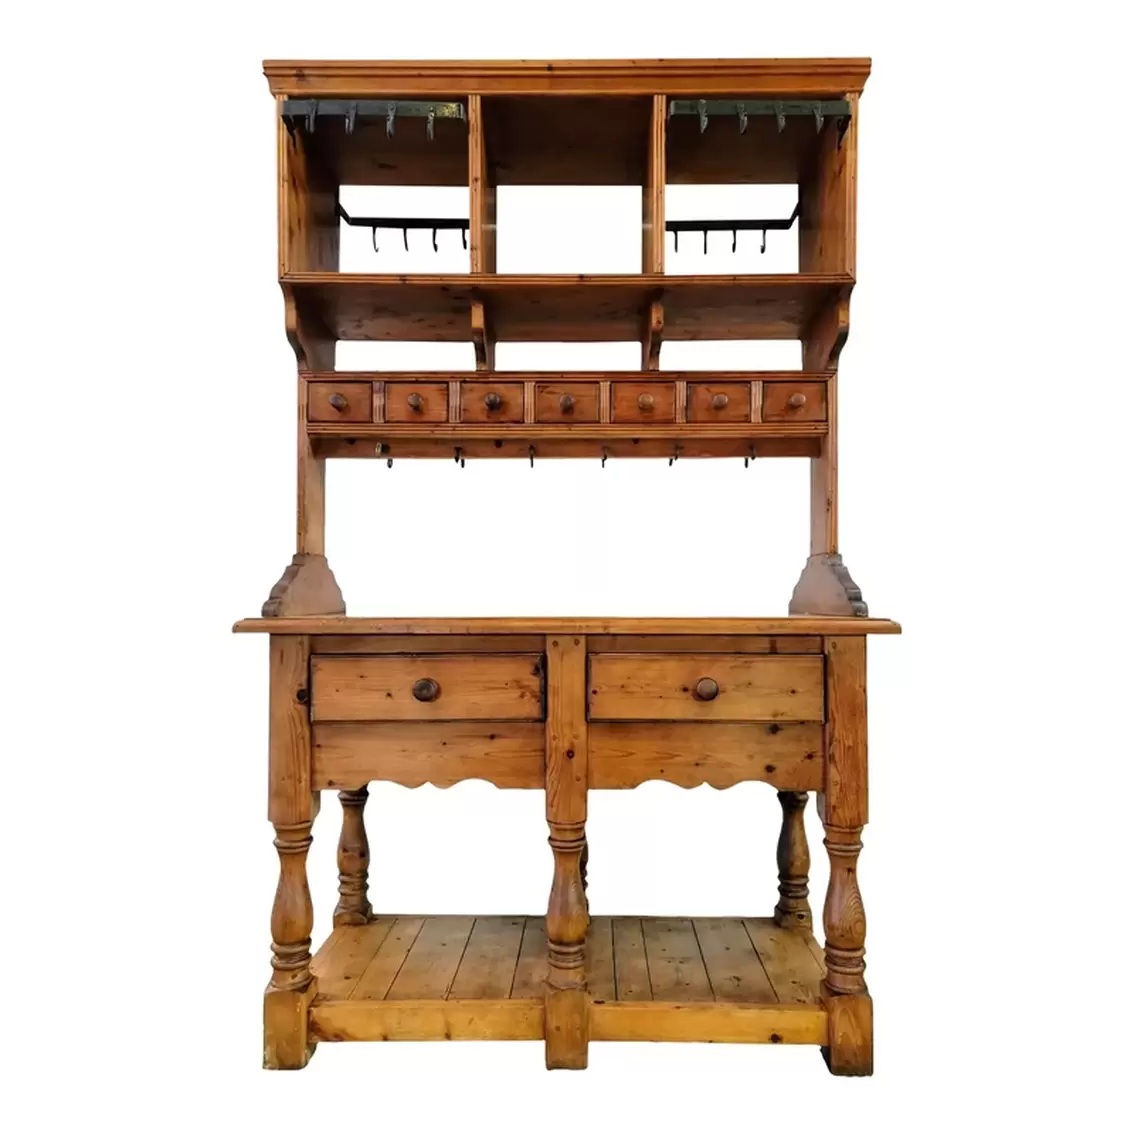 Late-19th-century European pine baker's table and rack was designed for use on both sides as all drawers are retractable from either side; the open cubbies and lower self are accessible from either side; and both sides are fitted with iron utensil racks.  The flat top offers storage possibilities outside of the pigeon holes, spice drawers, frieze drawers, and bottom slat-constructed open shelf.  The shaped side supports, molded edges, serpentine aprons, and turned baluster legs add interest.  The drawers open on either side with a tug on the turned wooden knob pulls.  The baker's table is inset with a white, grey, and yellow marble top.